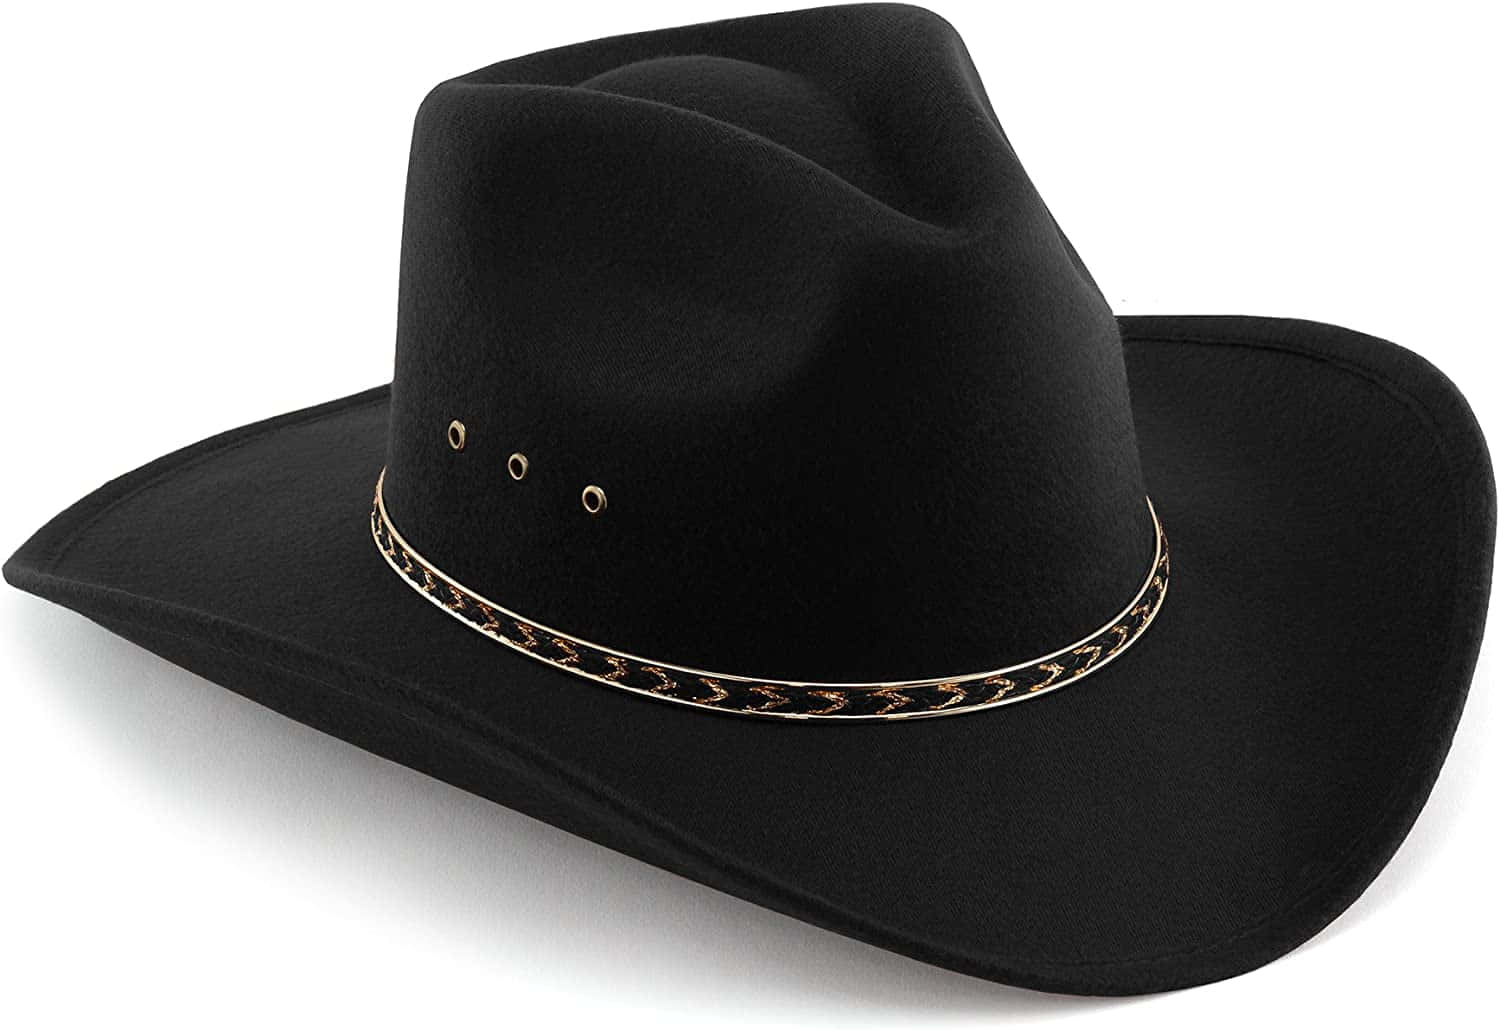 A Black Cowboy Hat With A Chain On It